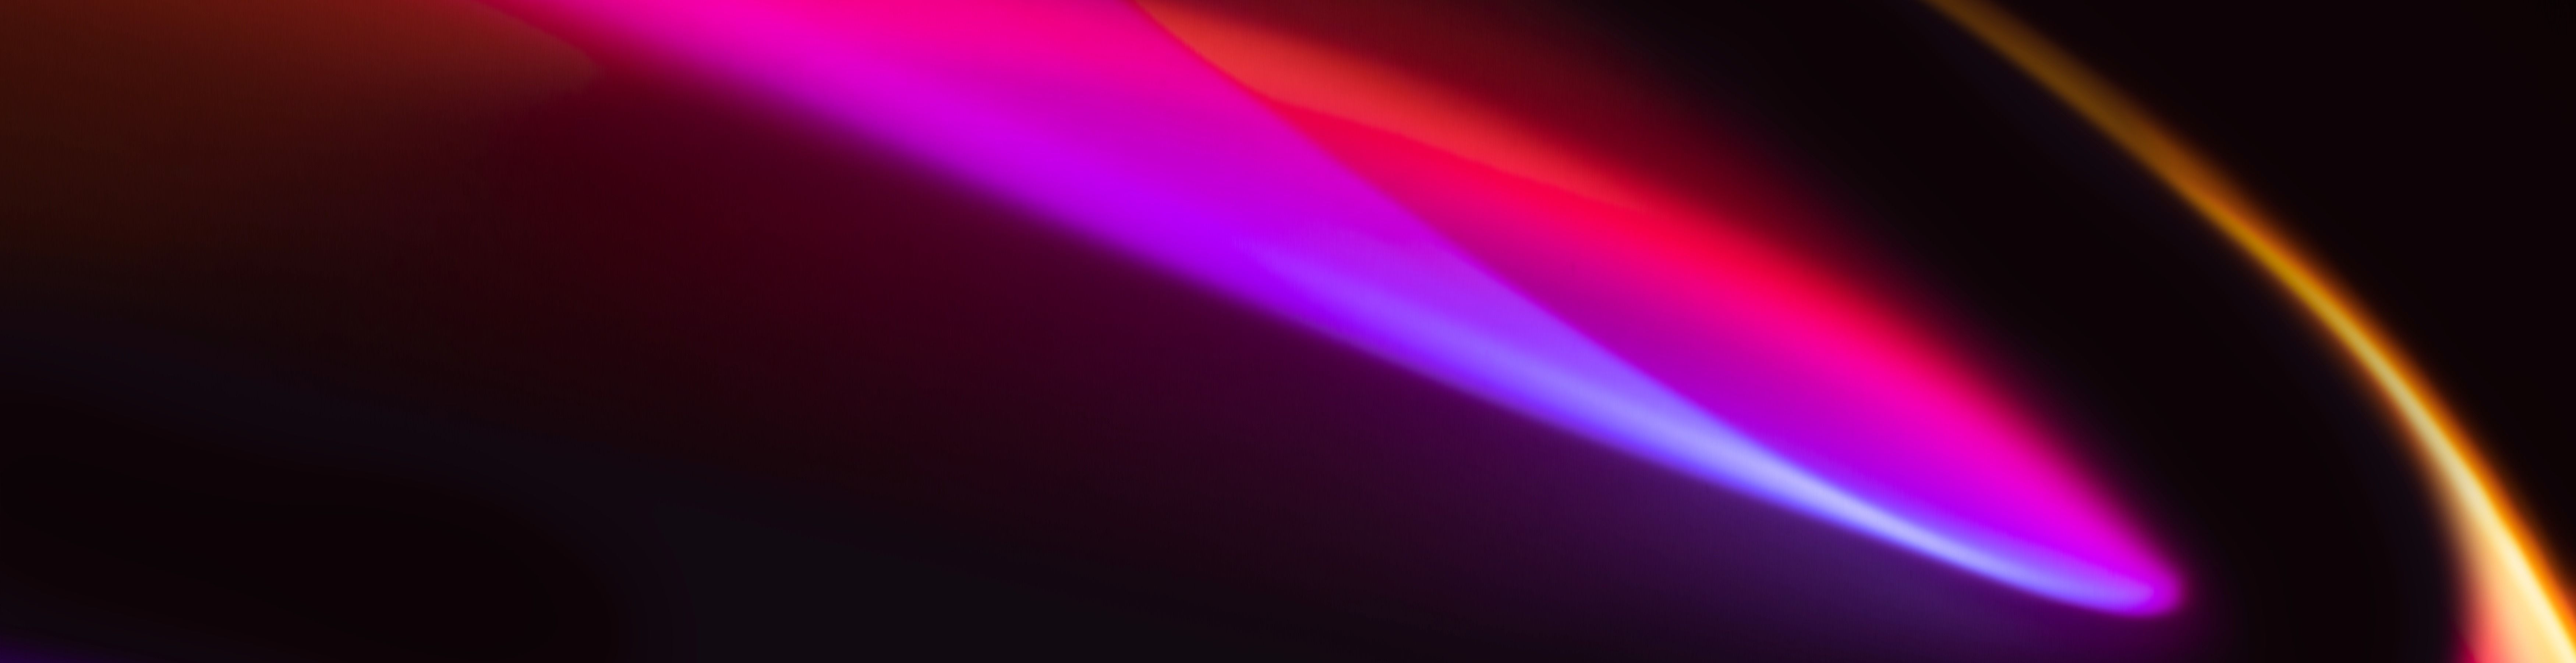 colorful-abstract-background-with-neon-led-light-1